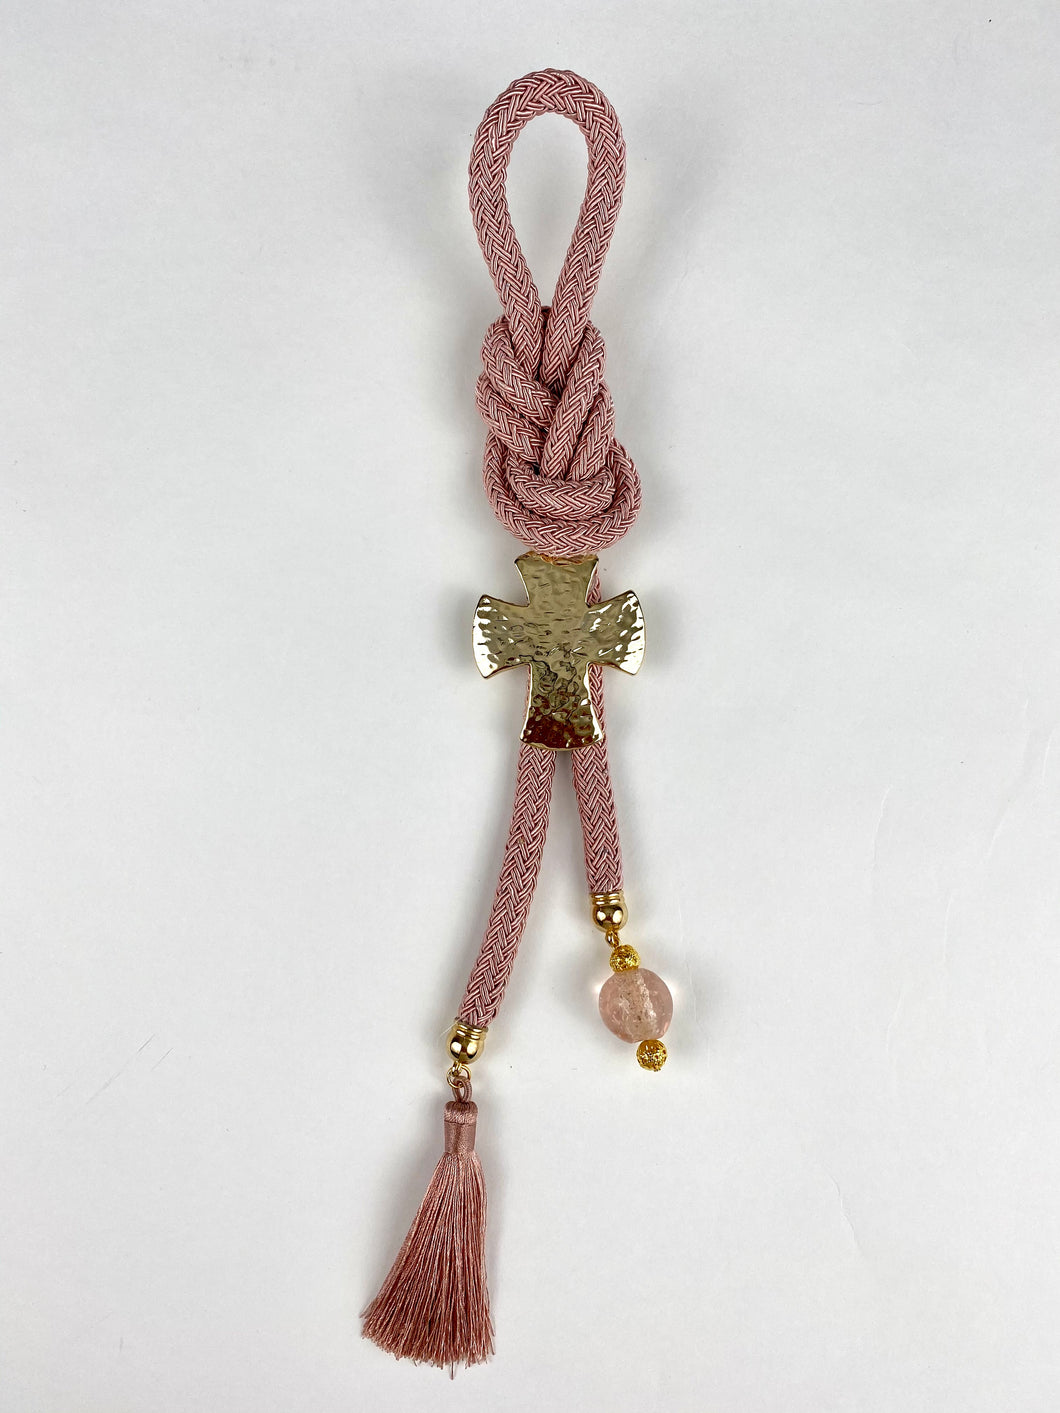 Gouri 202013 Dusty Rose Braided Cord with Large Hammered Gold Cross, tassel and Murano Glass Bead